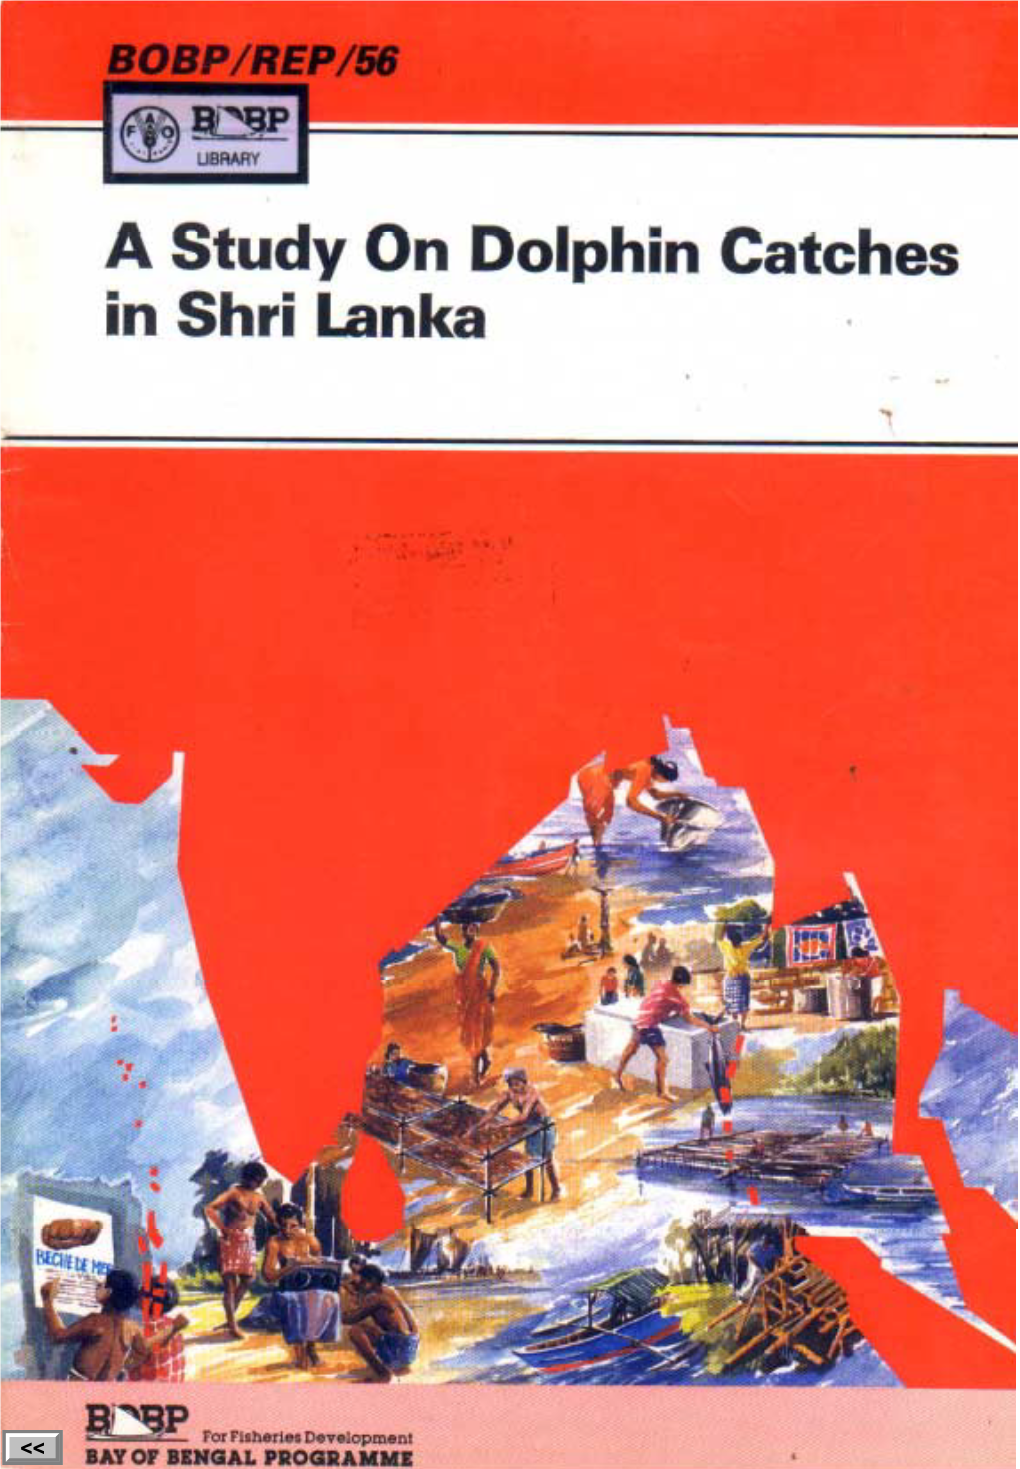 A Study on Dolphin Catches in Shri Lanka BAY of BENGAL PROGRAMME BOBP/REP/56 Small-Scale Fisherfolk Communities GCP/RAS/1 I 8/MUL